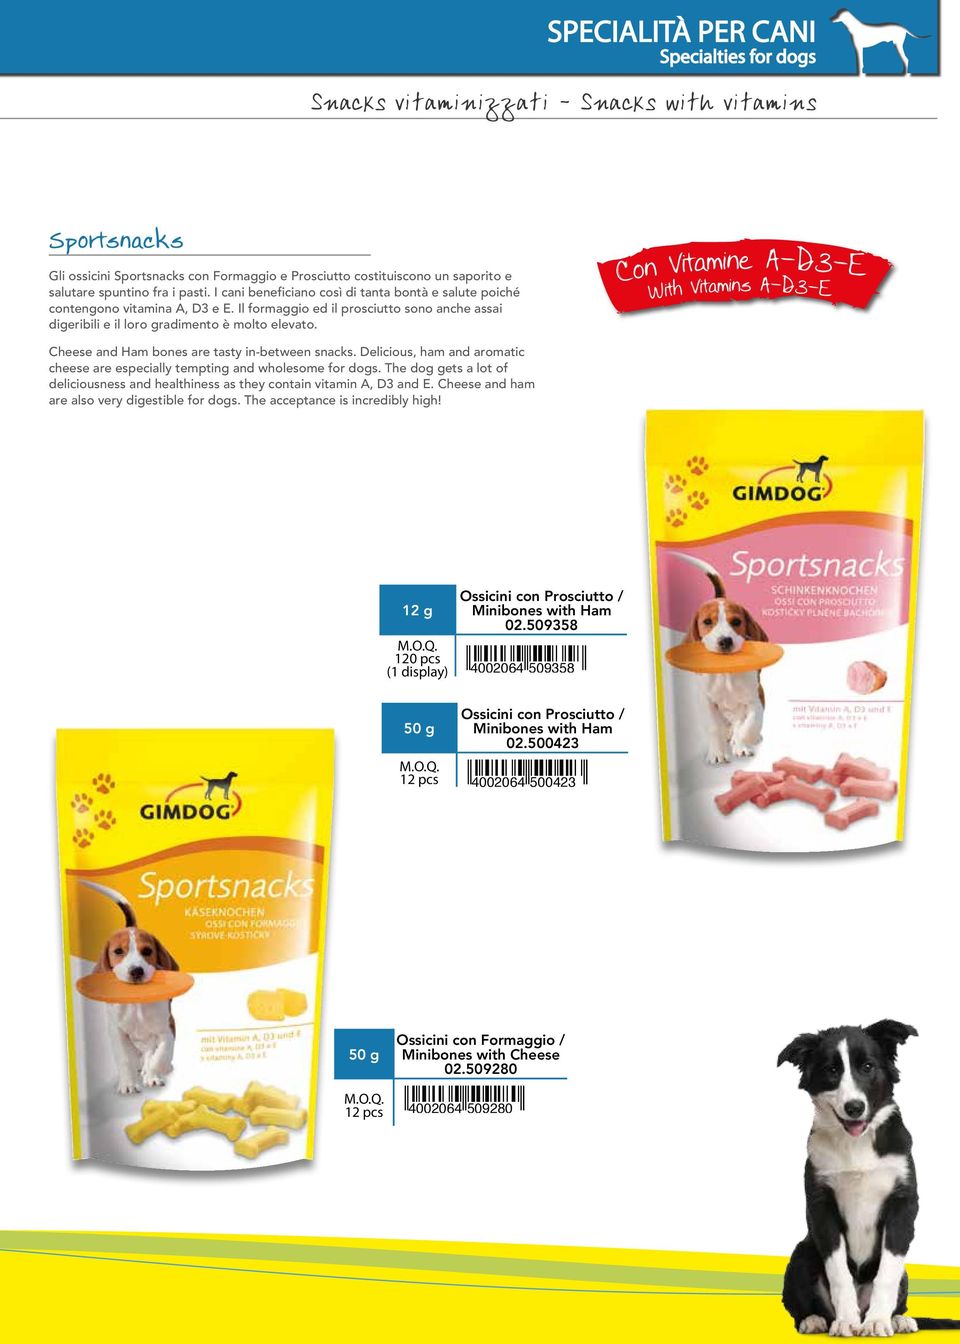 Con Vitamine A-D3-E With Vitamins A-D3-E Cheese and Ham bones are tasty in-between snacks. Delicious, ham and aromatic cheese are especially tempting and wholesome for dogs.